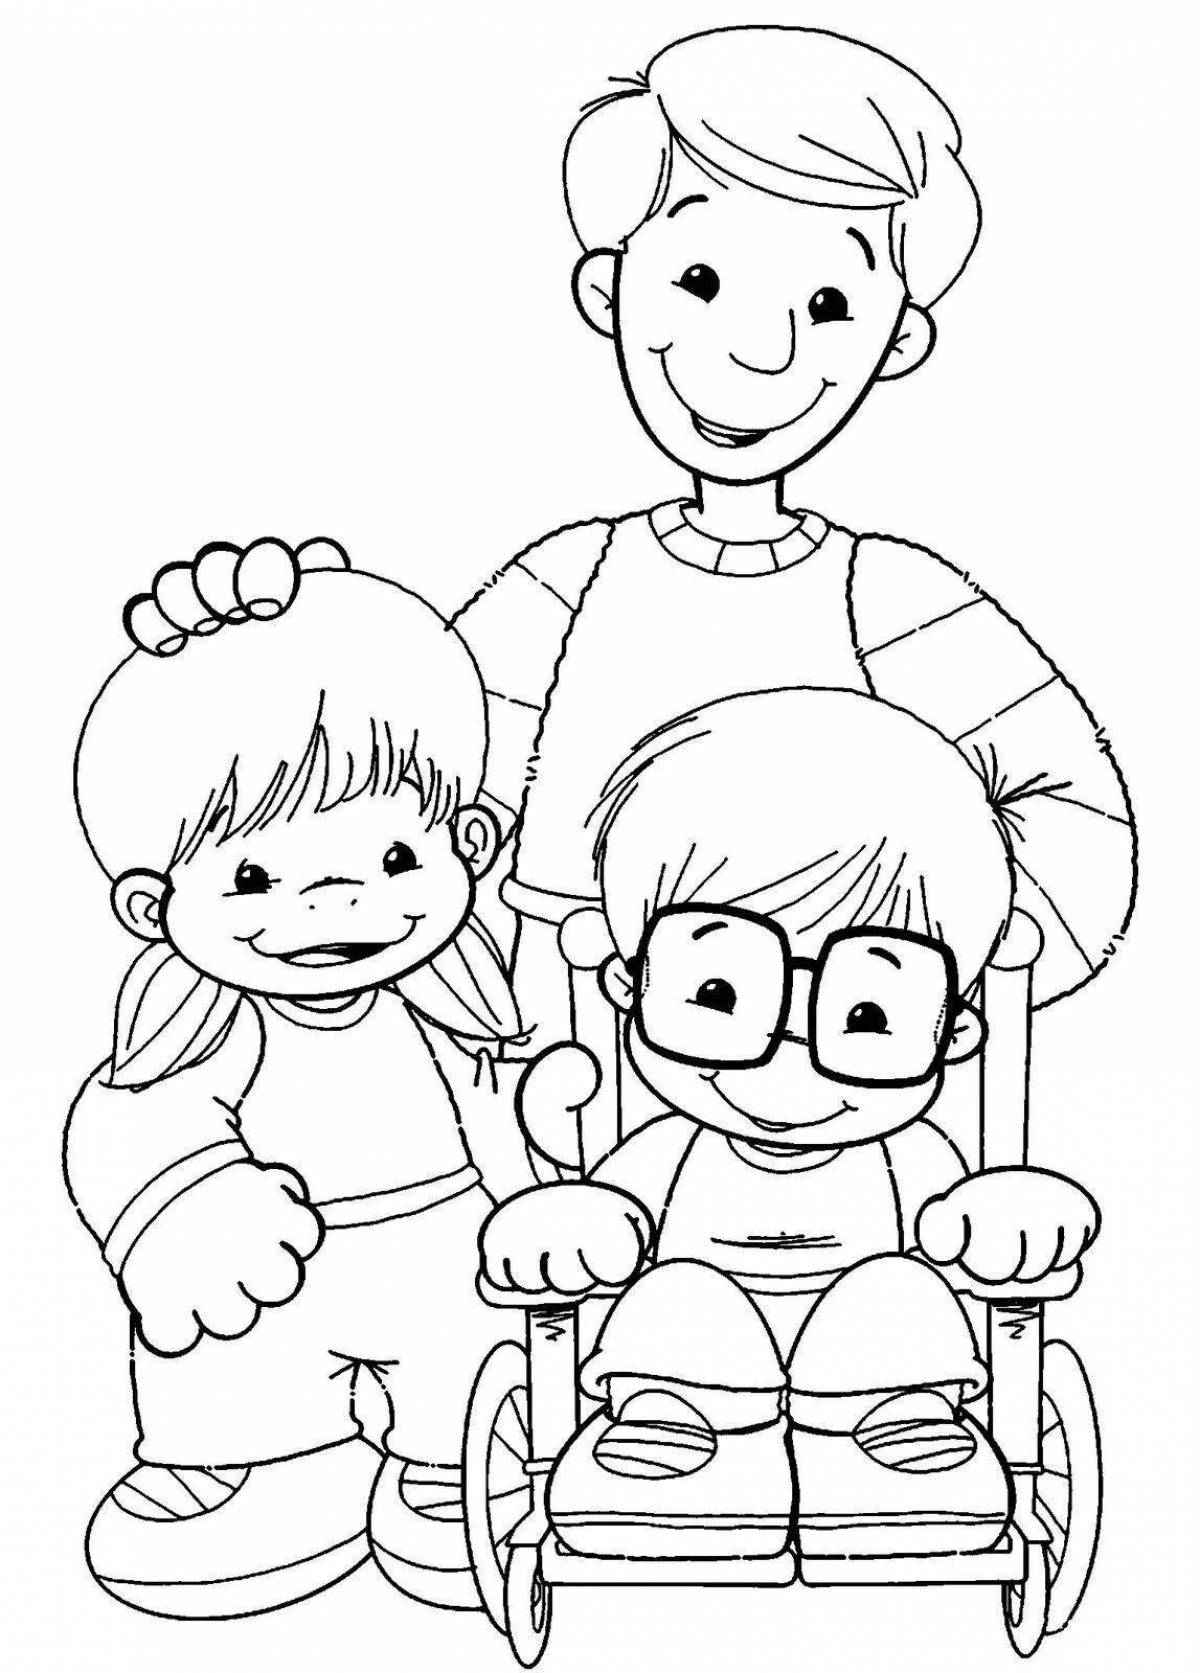 Coloring page of the rights of the child